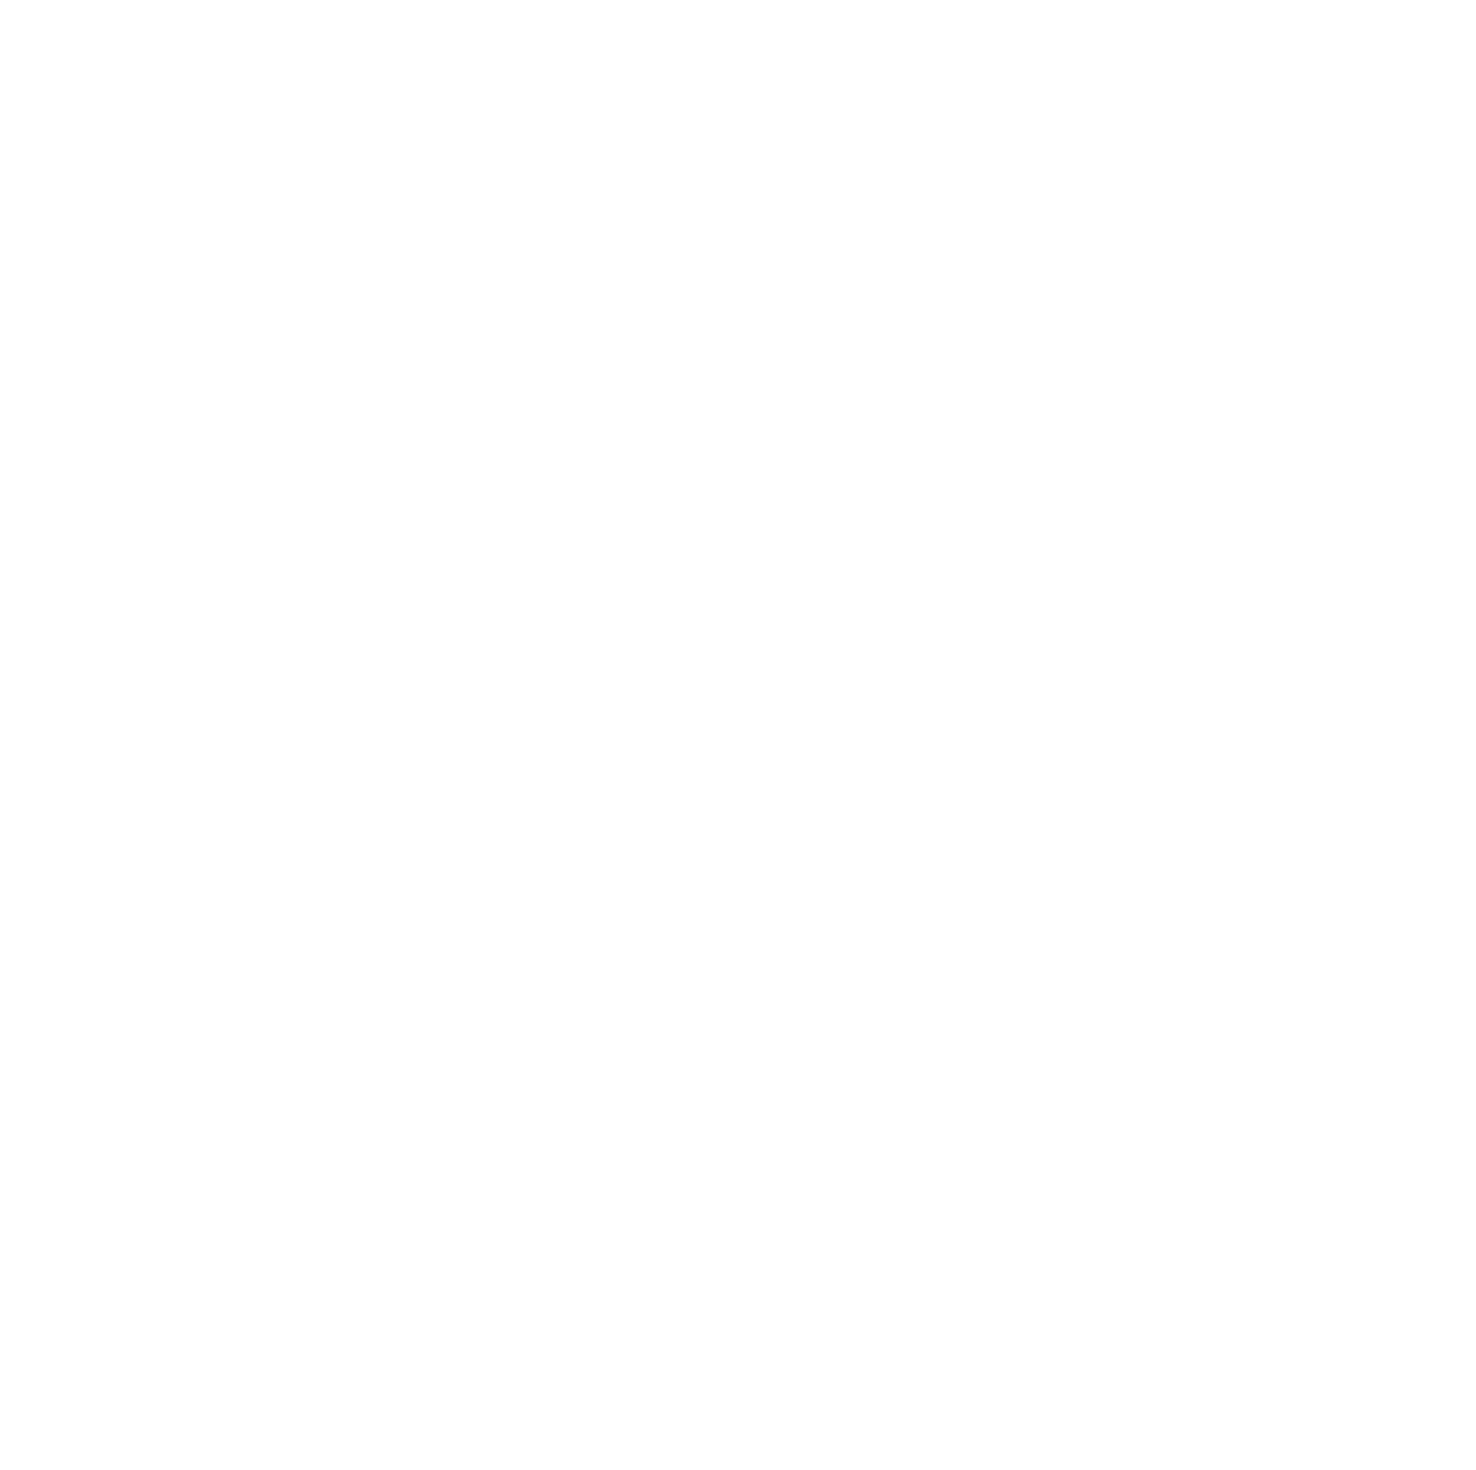 The Cameron Day Charitable Trust